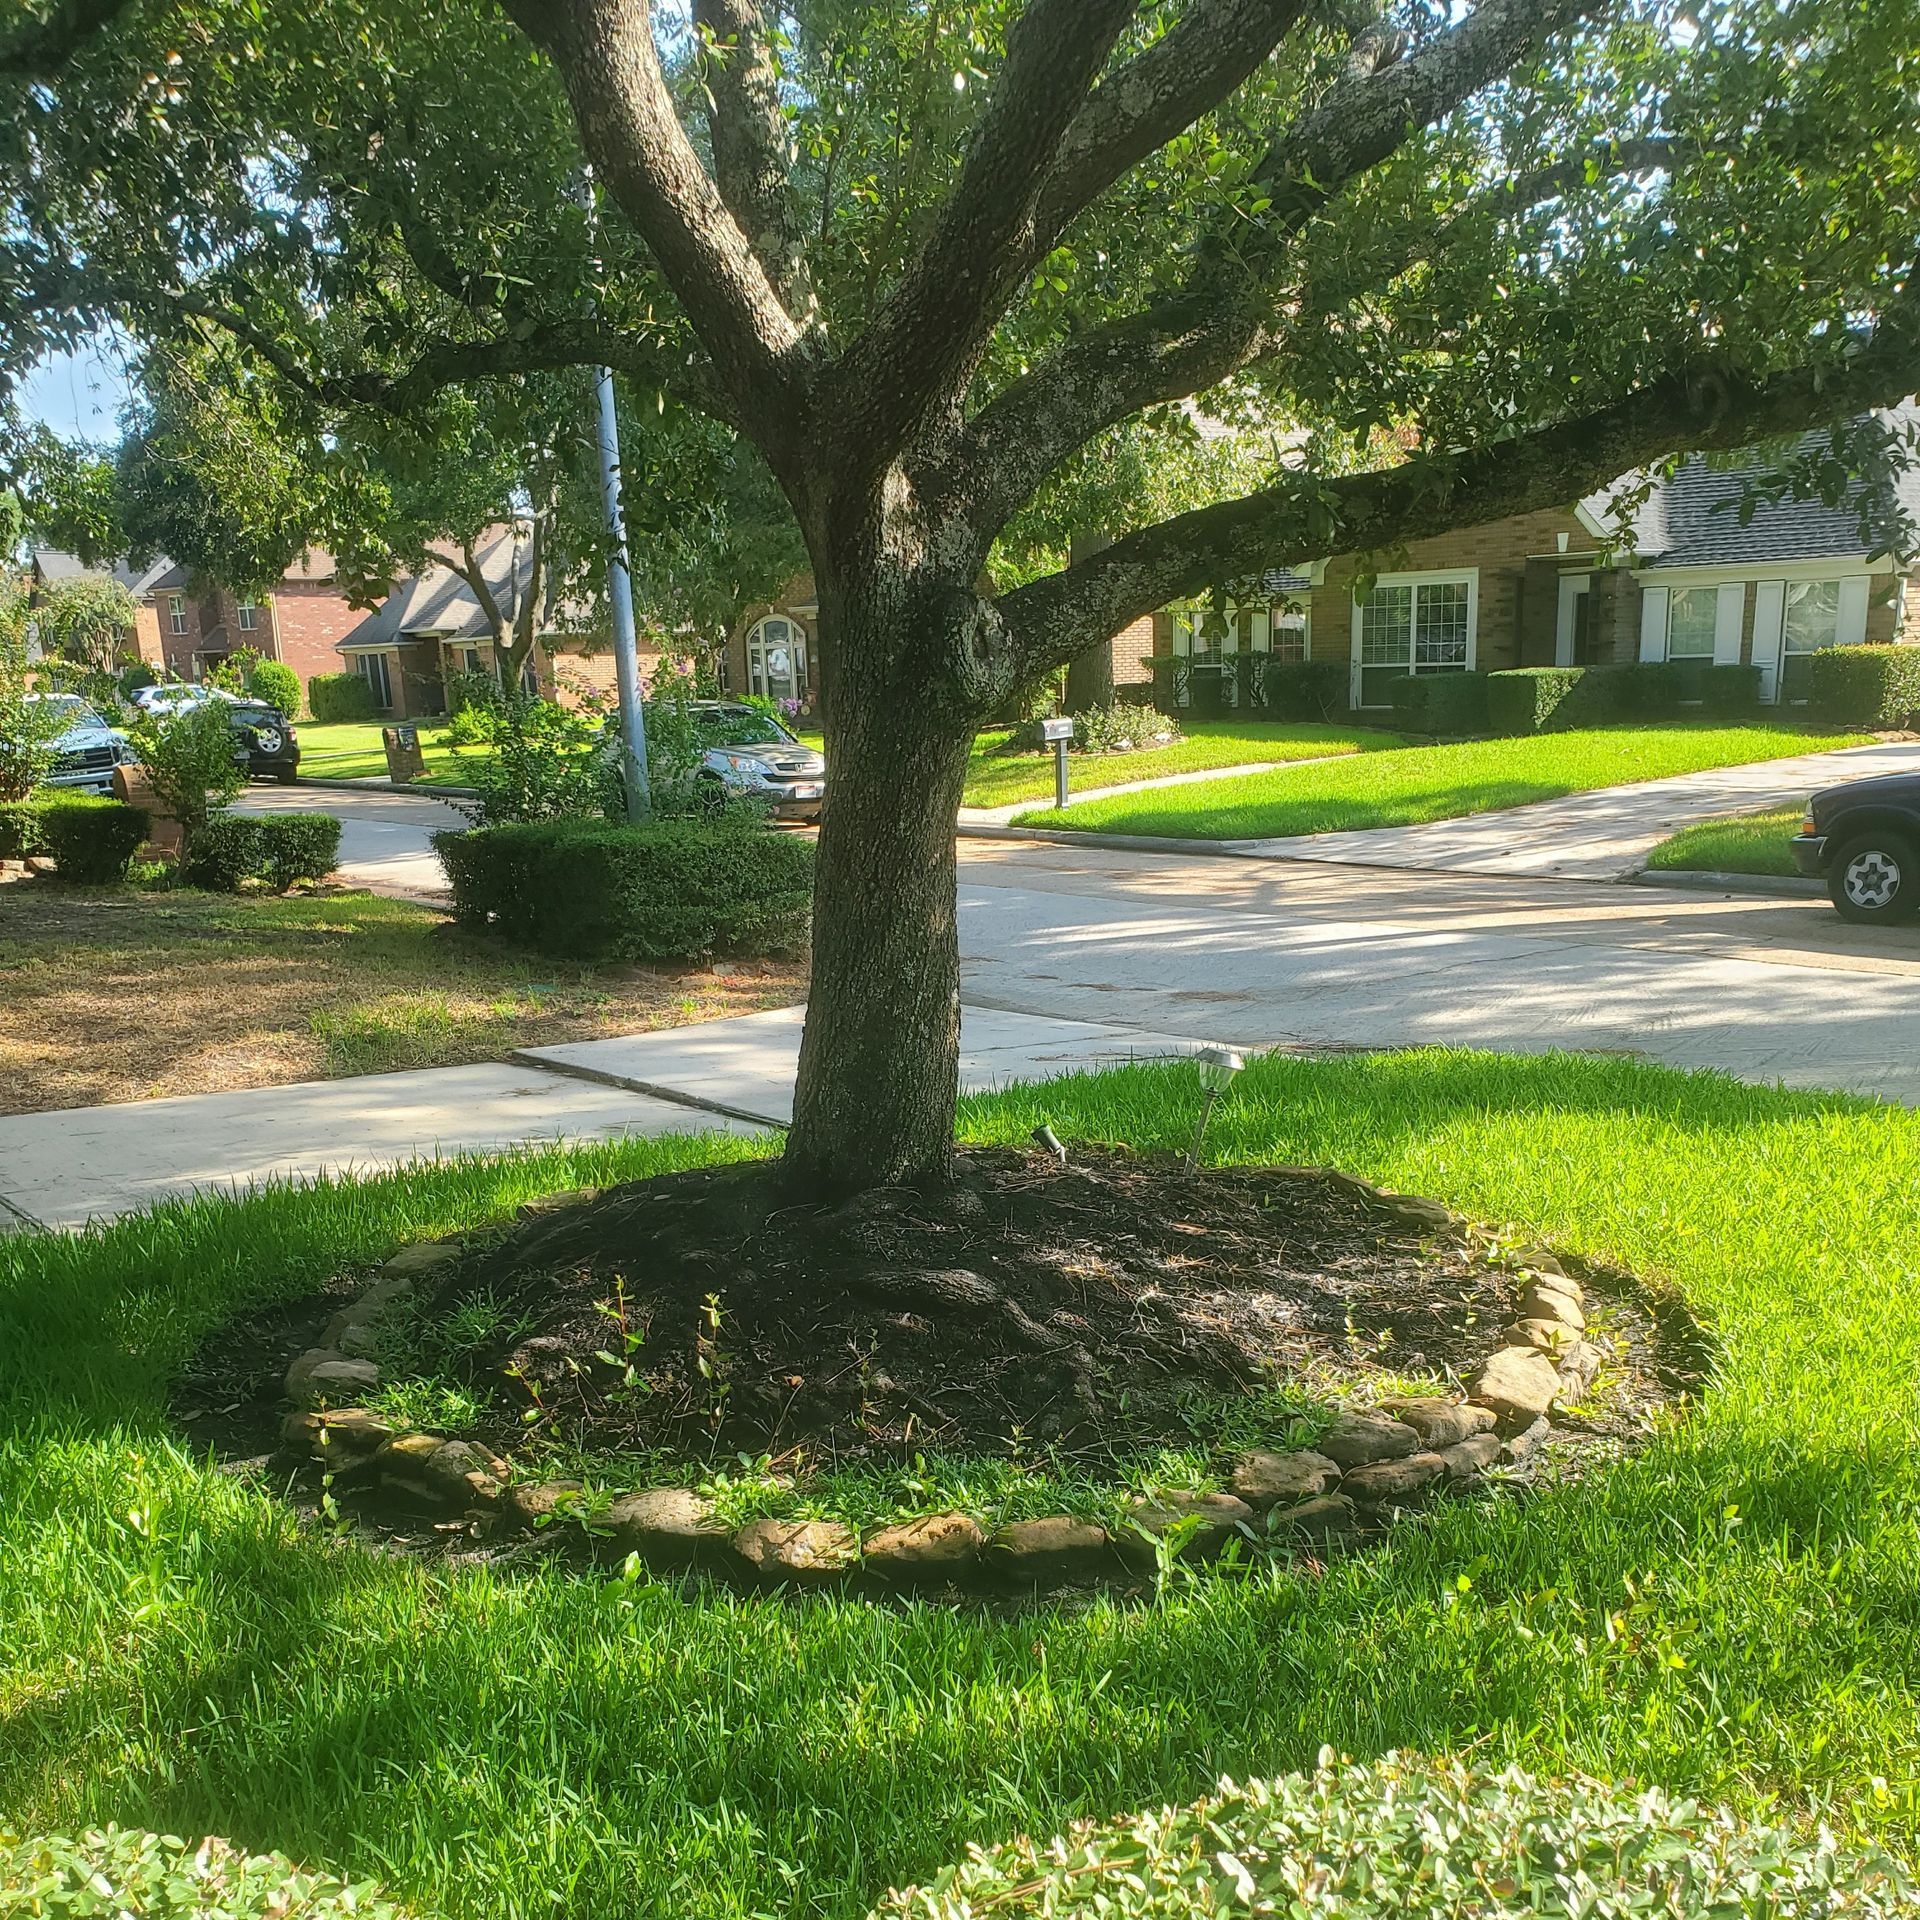 This image shows what happens to a tree after many years of over-mulching that made a root plate.